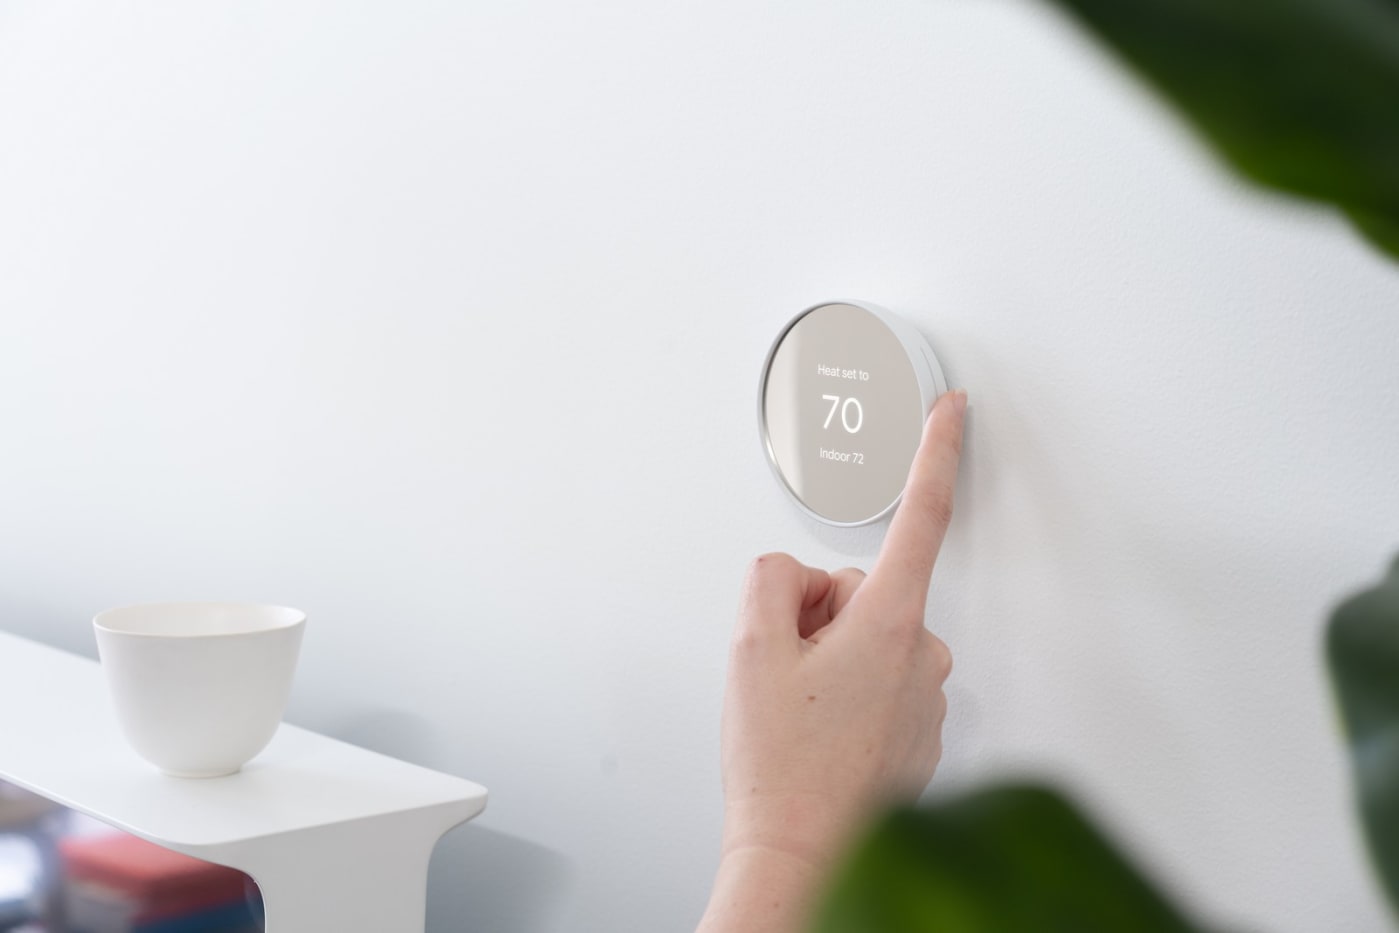 The Google Nest Thermostat drops to $100 ahead of the Amazon Big Spring Sale